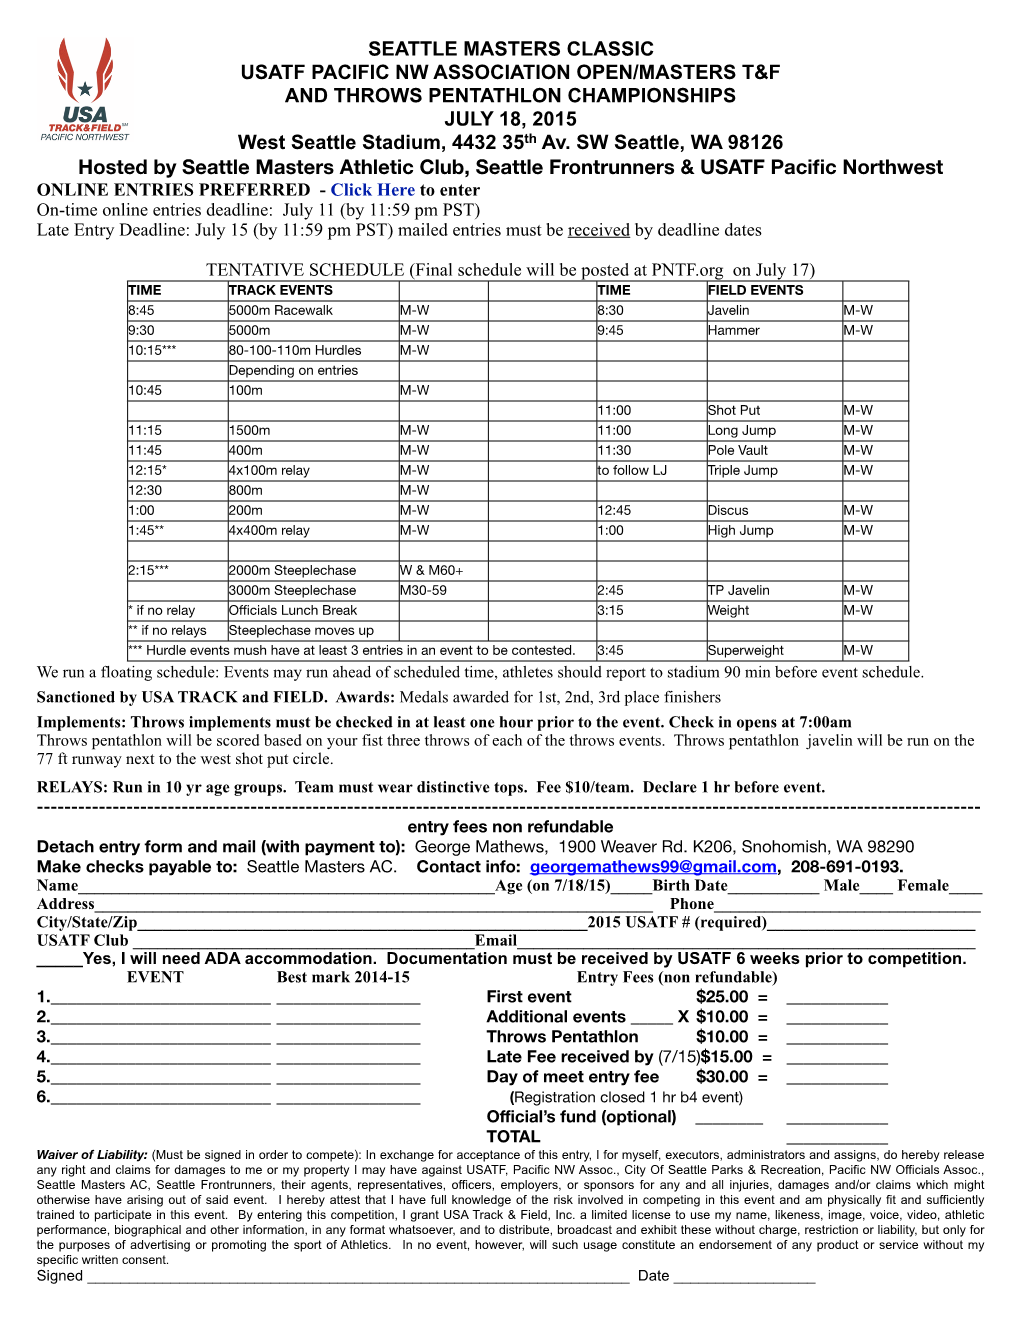 SEATTLE MASTERS CLASSIC USATF PACIFIC NW ASSOCIATION OPEN/MASTERS T&F and THROWS PENTATHLON CHAMPIONSHIPS JULY 18, 2015 West Seattle Stadium, 4432 35Th Av